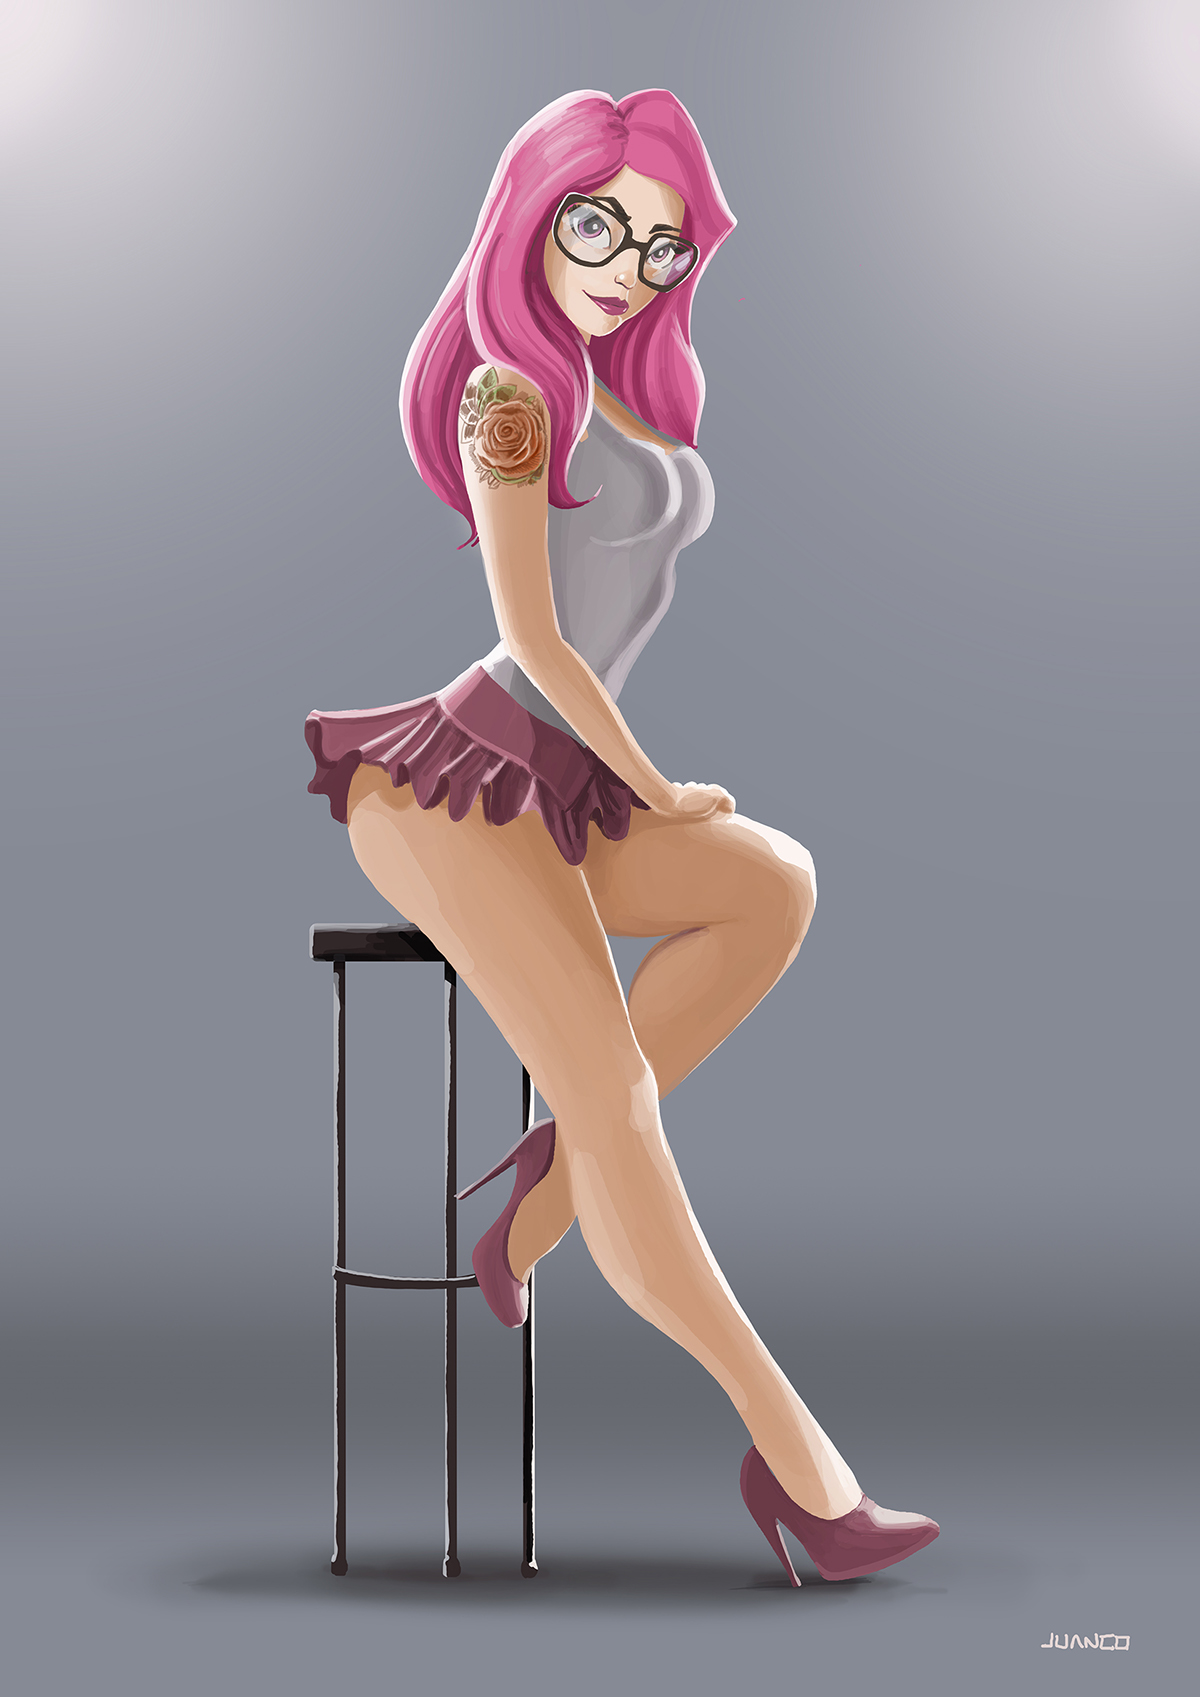 girl woman sexy illustrations Character design Sensuality